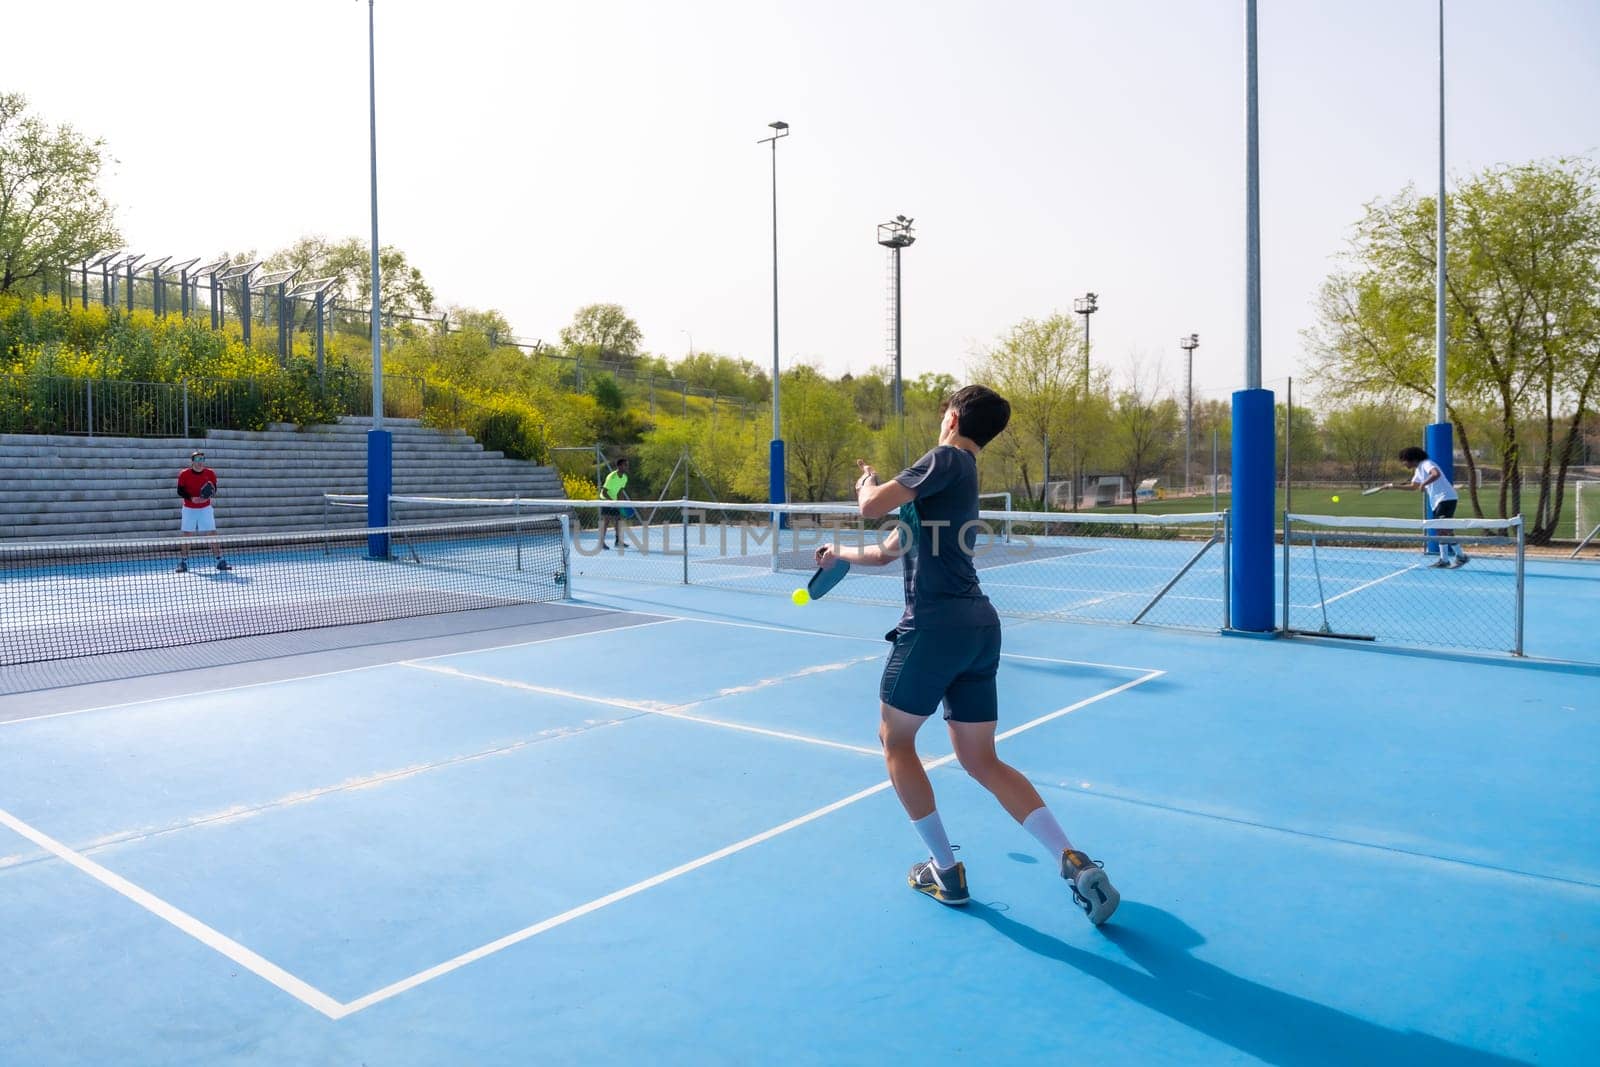 Men playing pickleball in an outdoor court by Huizi